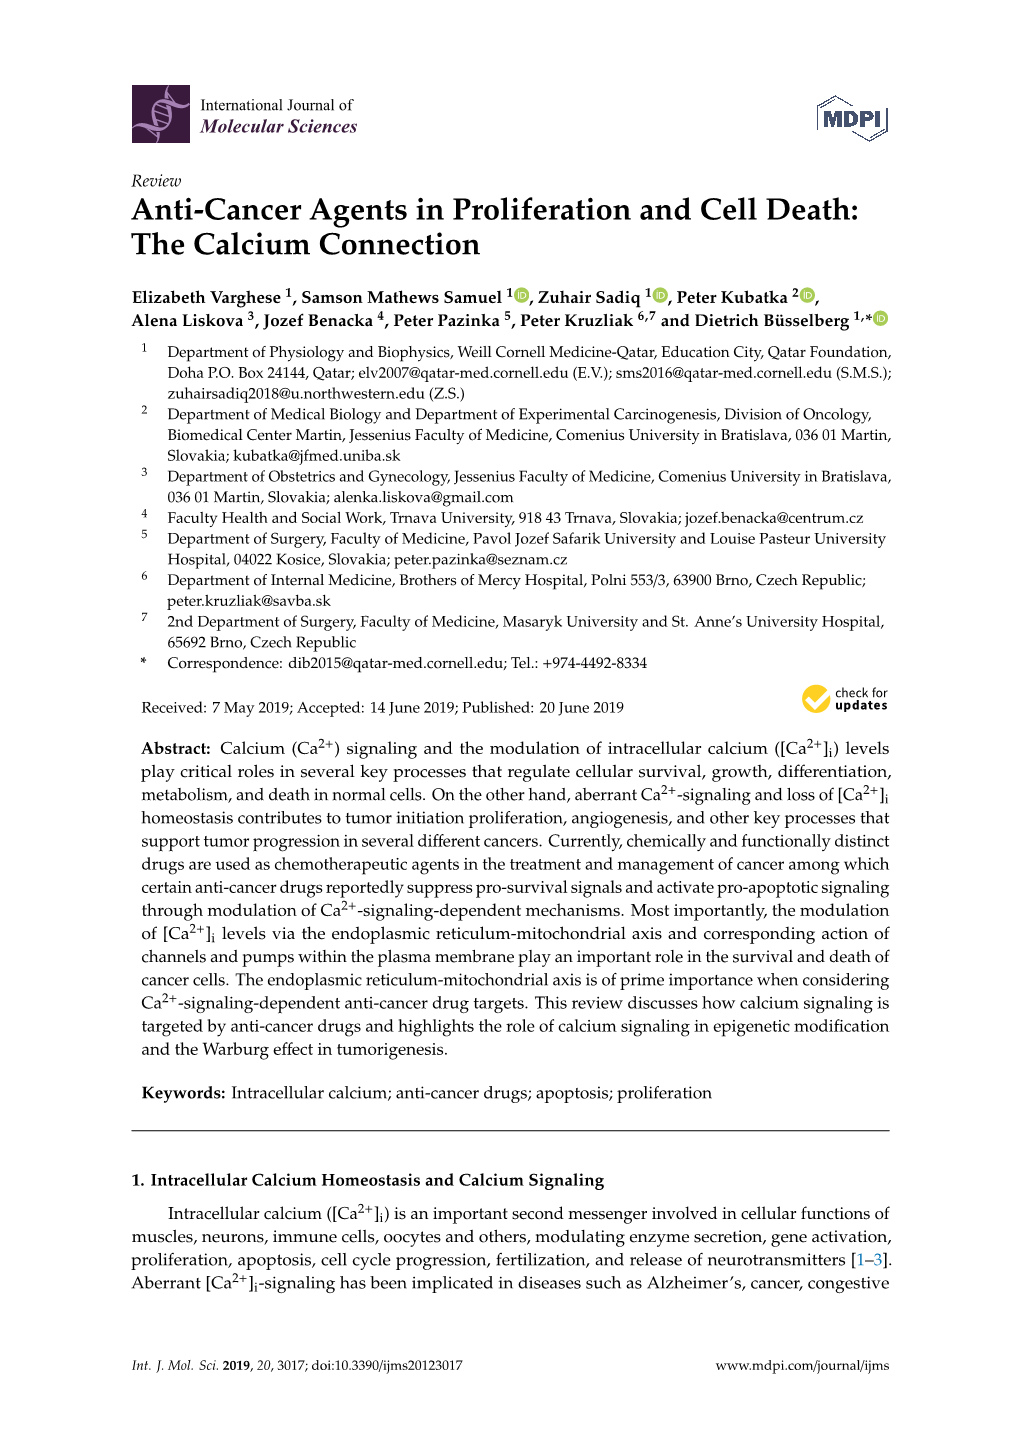 Anti-Cancer Agents in Proliferation and Cell Death: the Calcium Connection